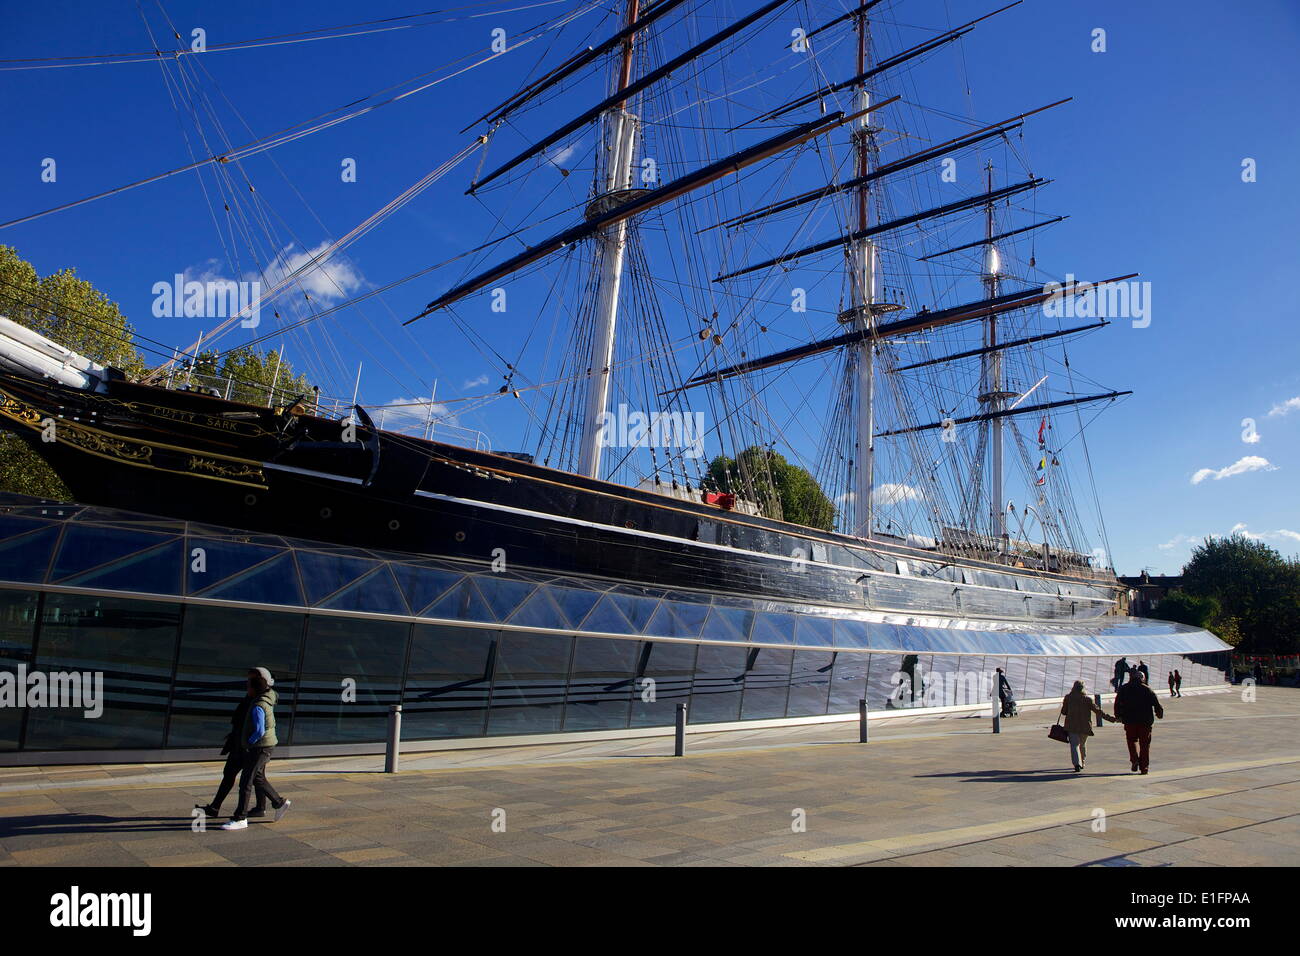 The Cutty Sark, a British Tea Clipper built in 1869 moored near the Thames at Greenwich, London, England, United Kingdom, Europe Stock Photo